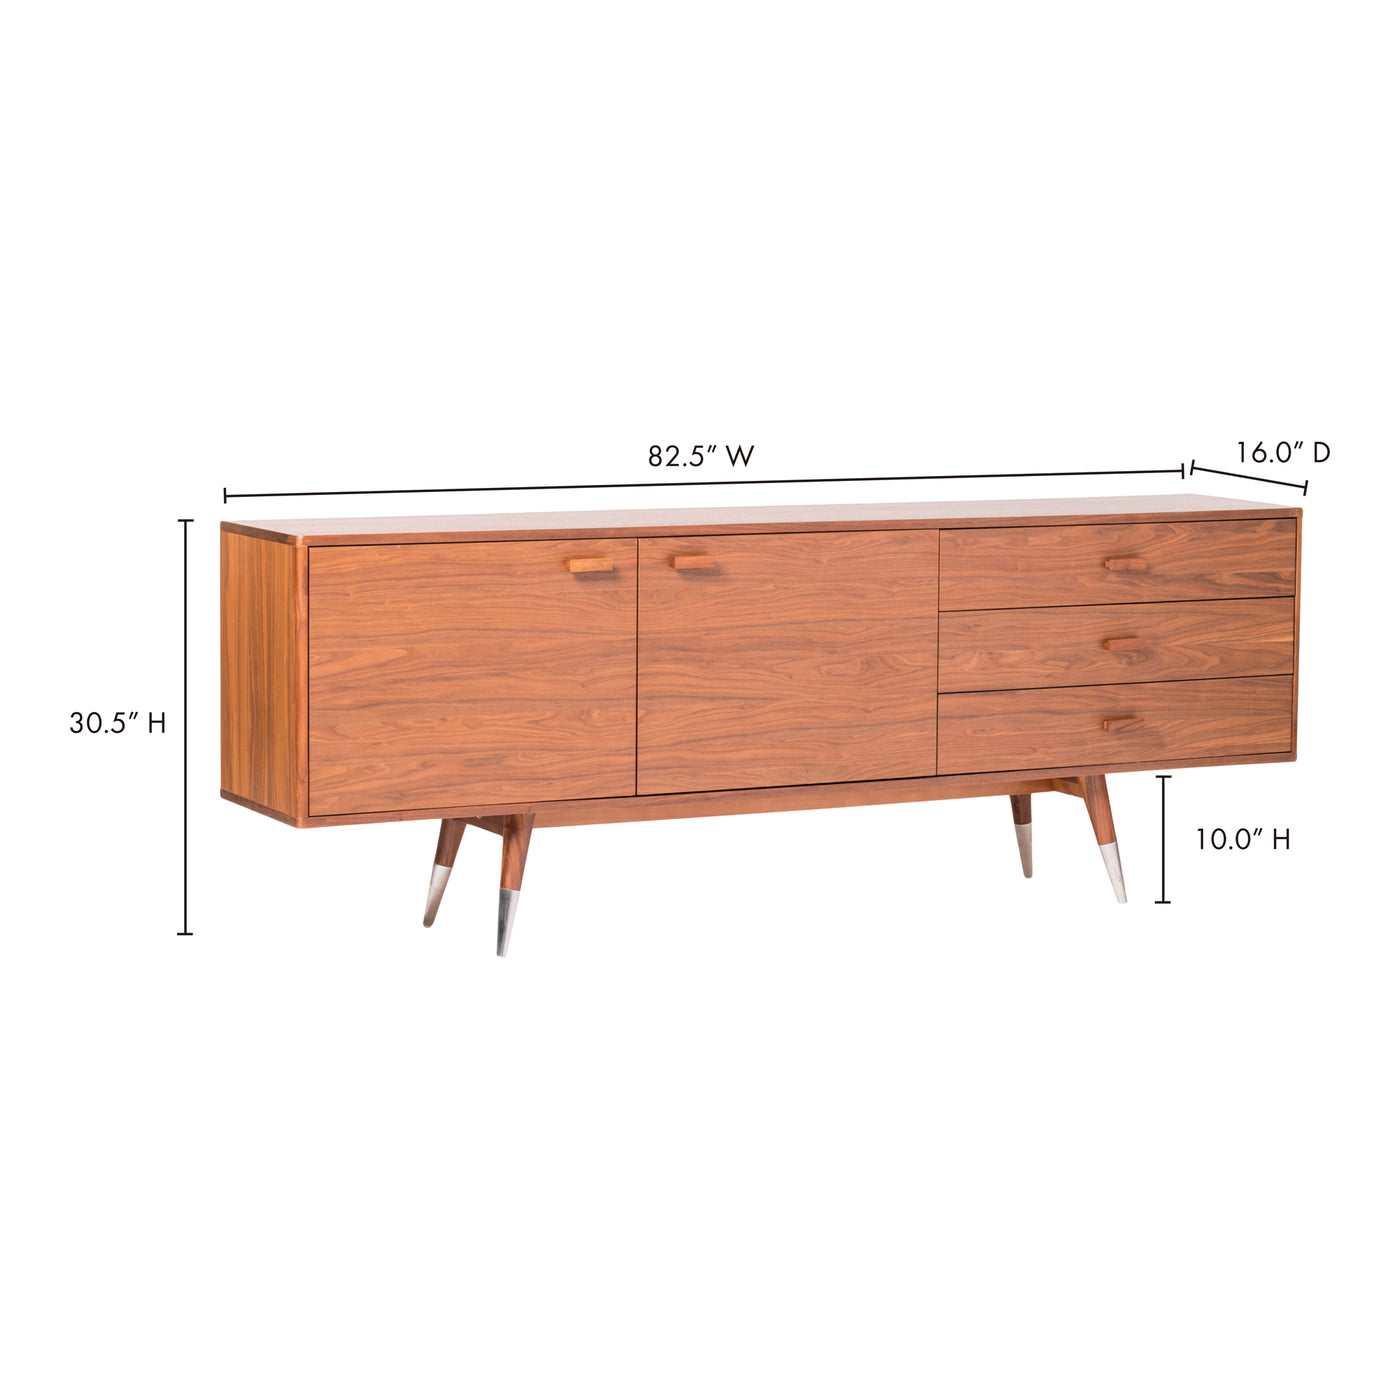 This Danish inspired sideboard is the perfect addition to any stylish dining room. Made of quality walnut-veneer and set o...